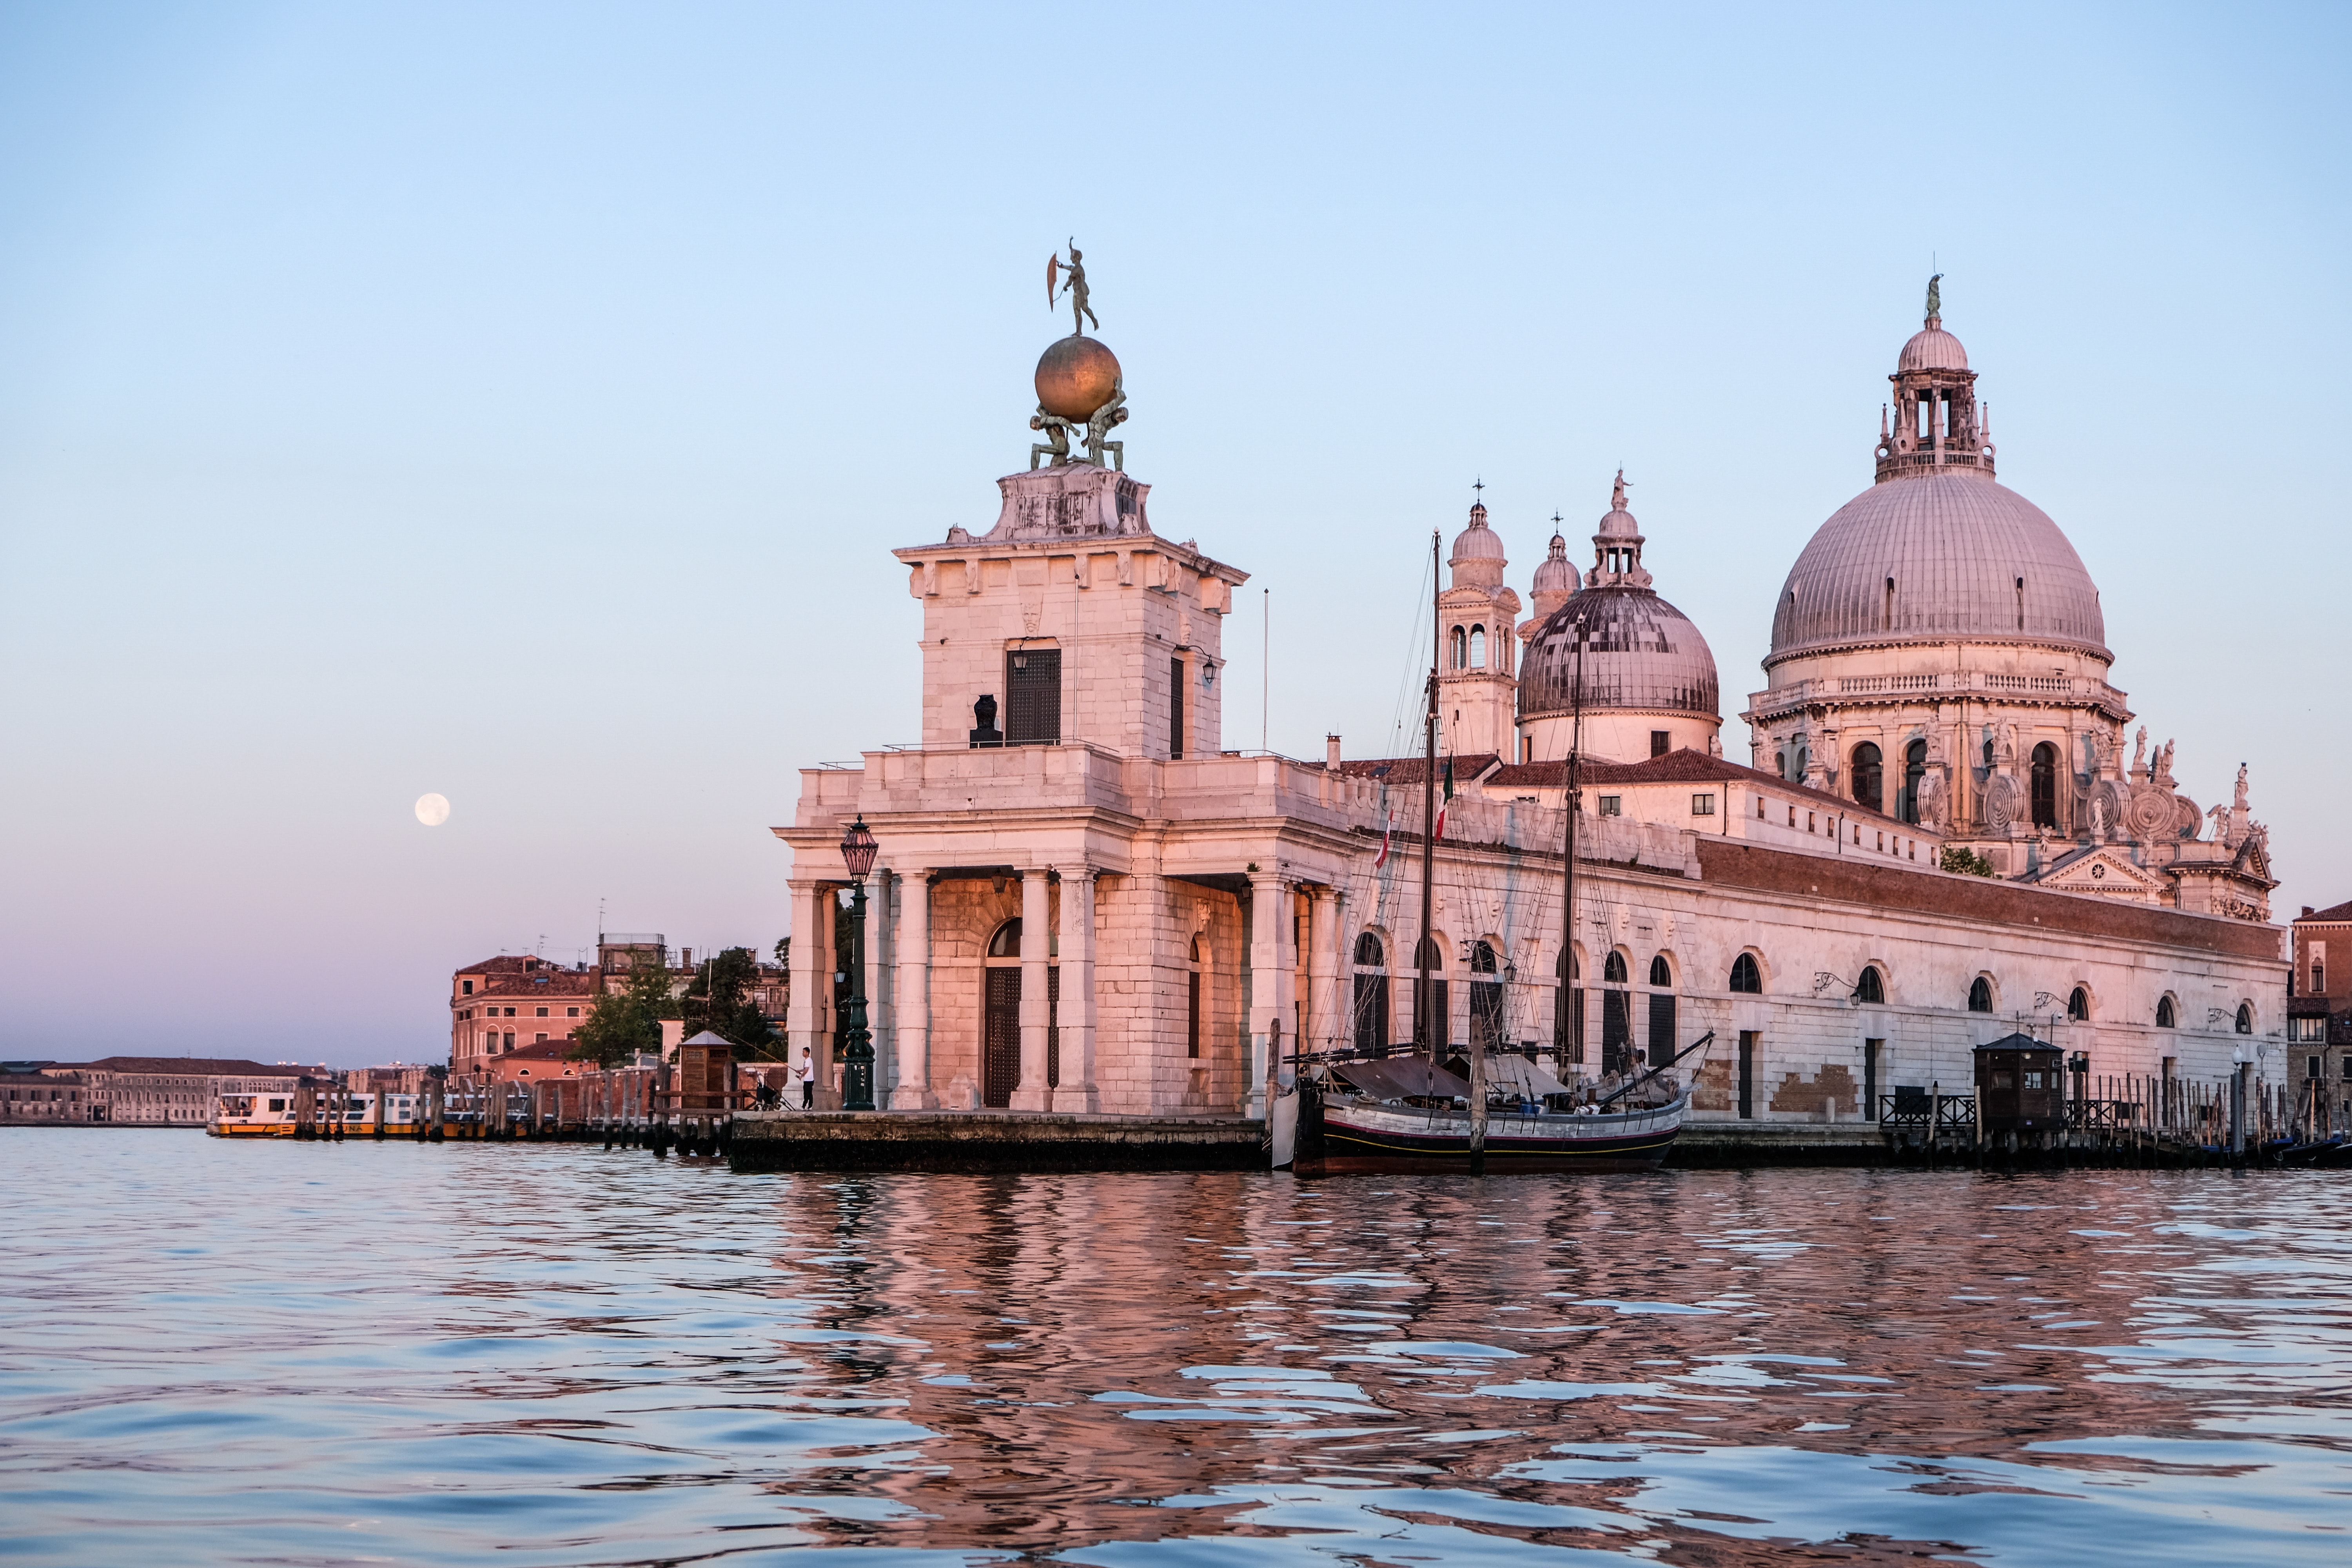 A few days from the 1600 years of Venice